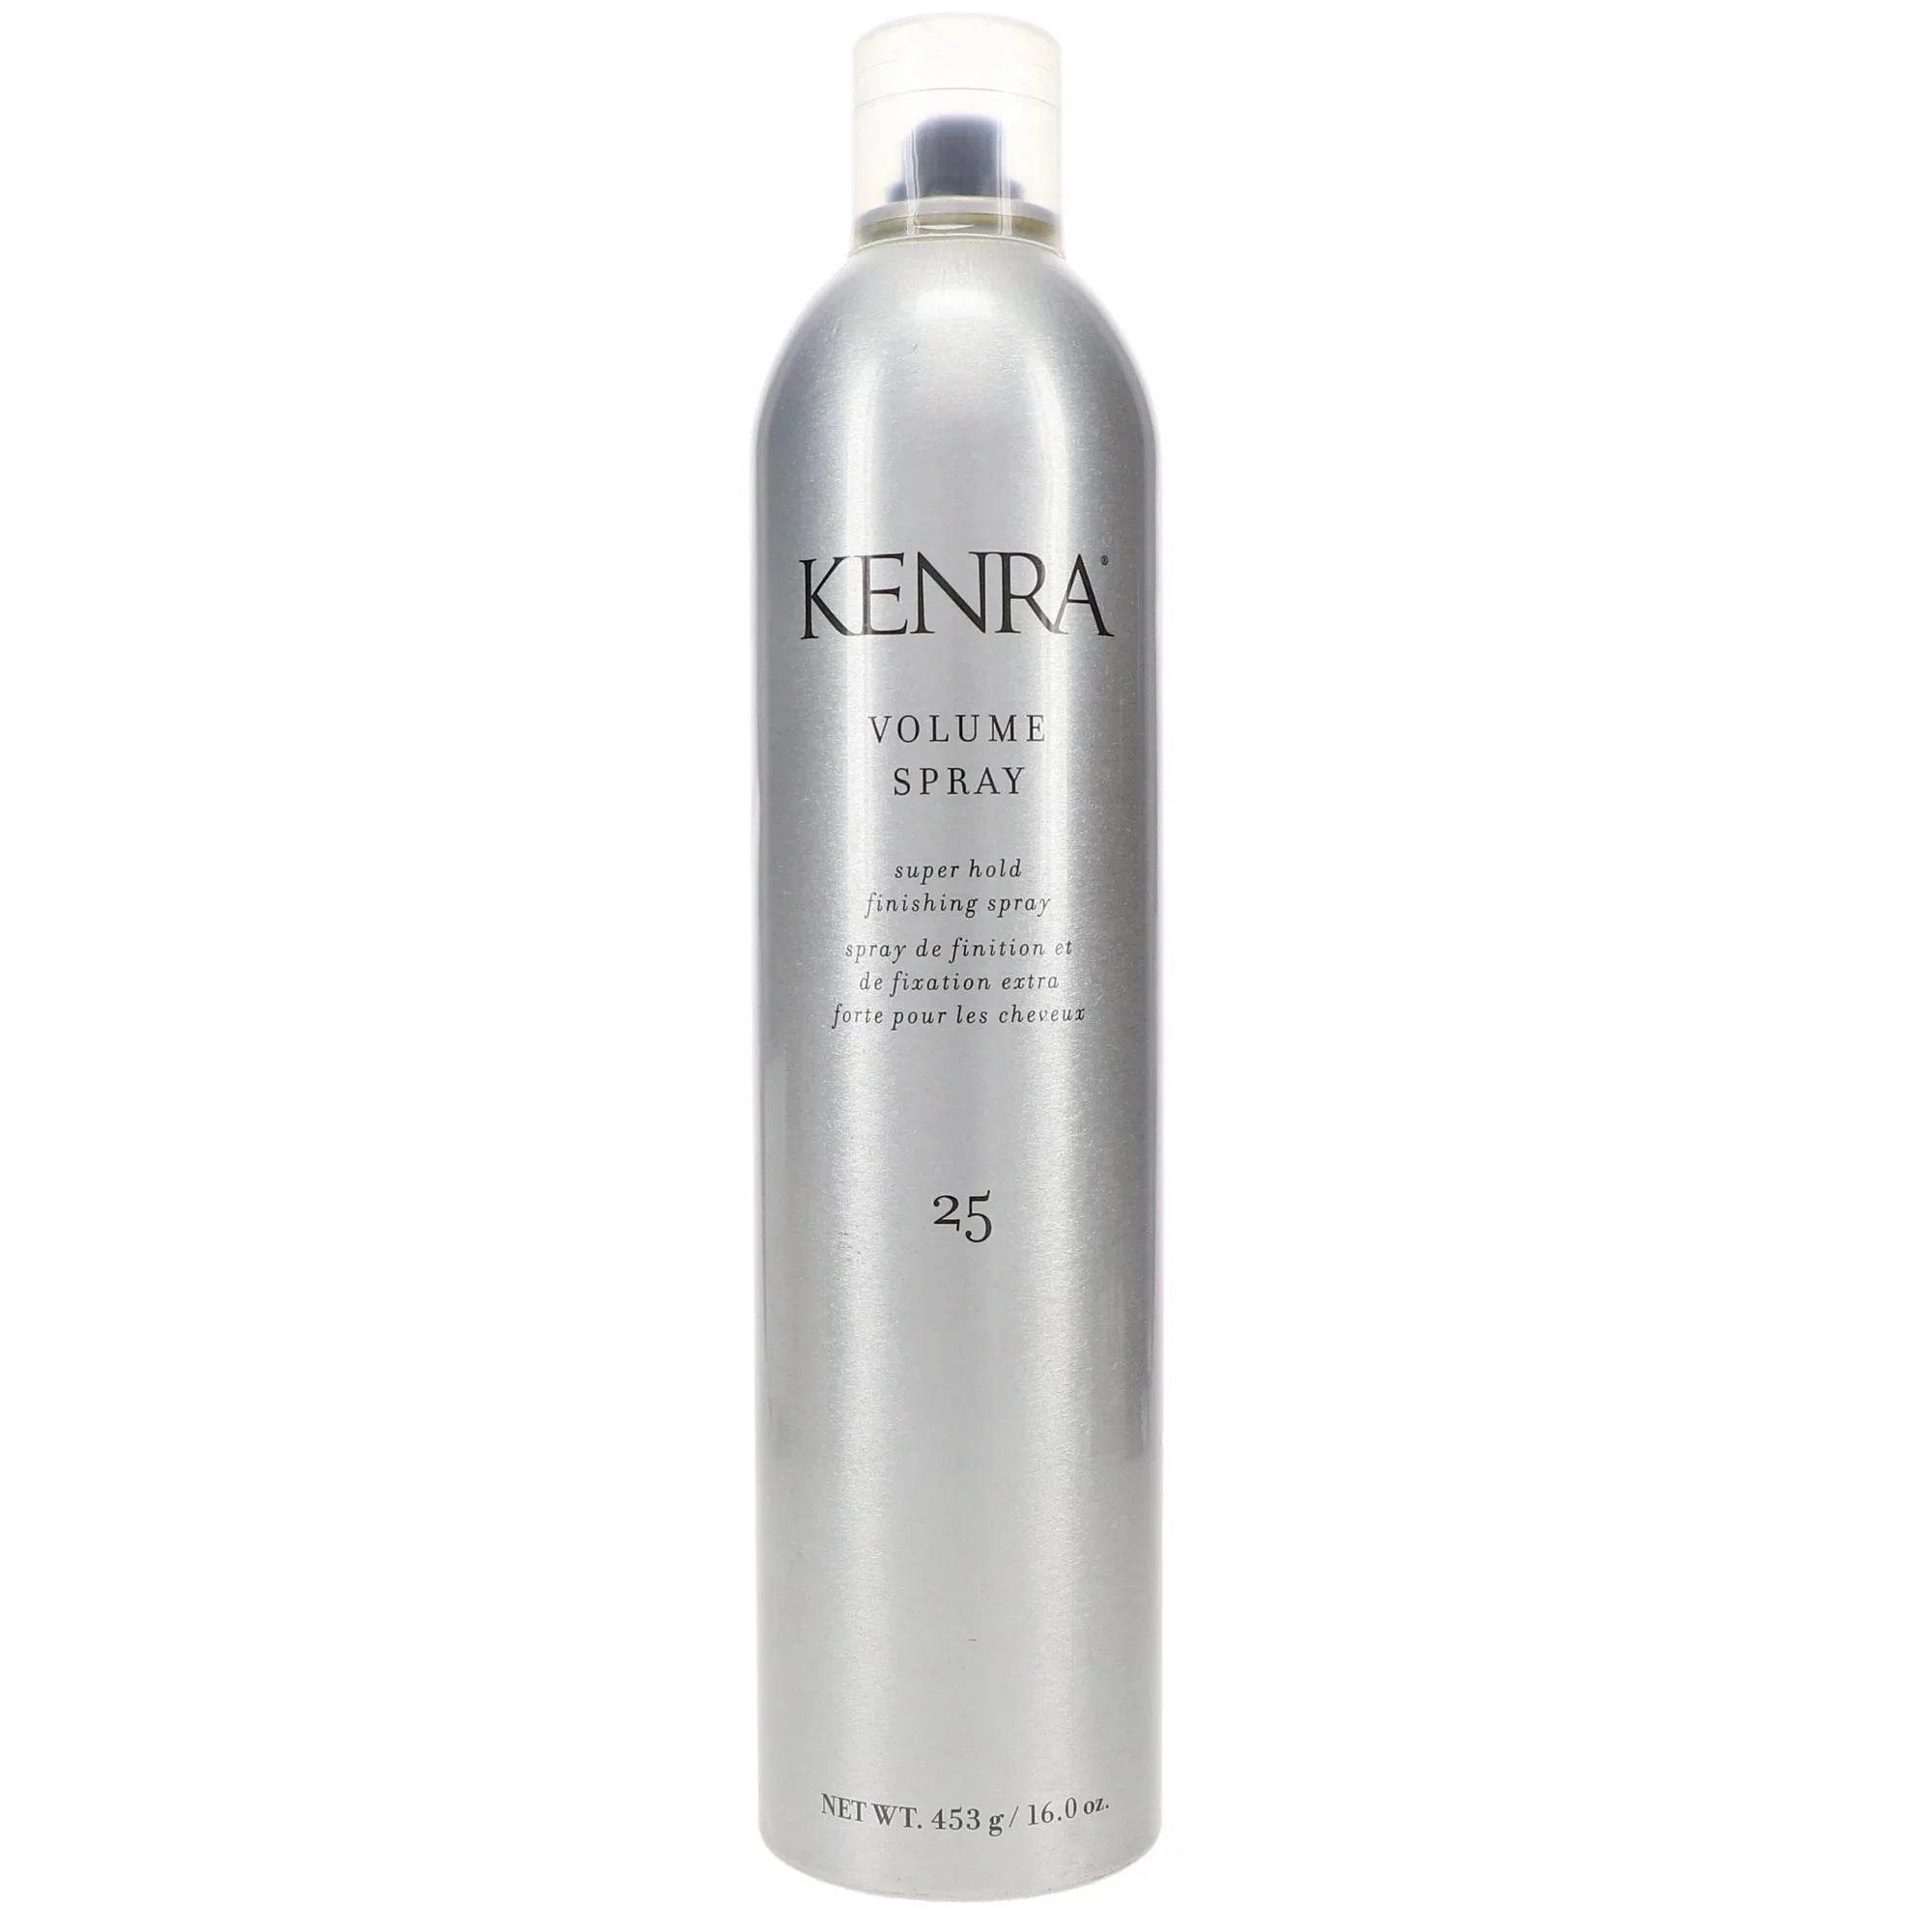 Wholesale prices with free shipping all over United States Kenra Volume Spray Hair Spray #25 16 oz - Steven Deals